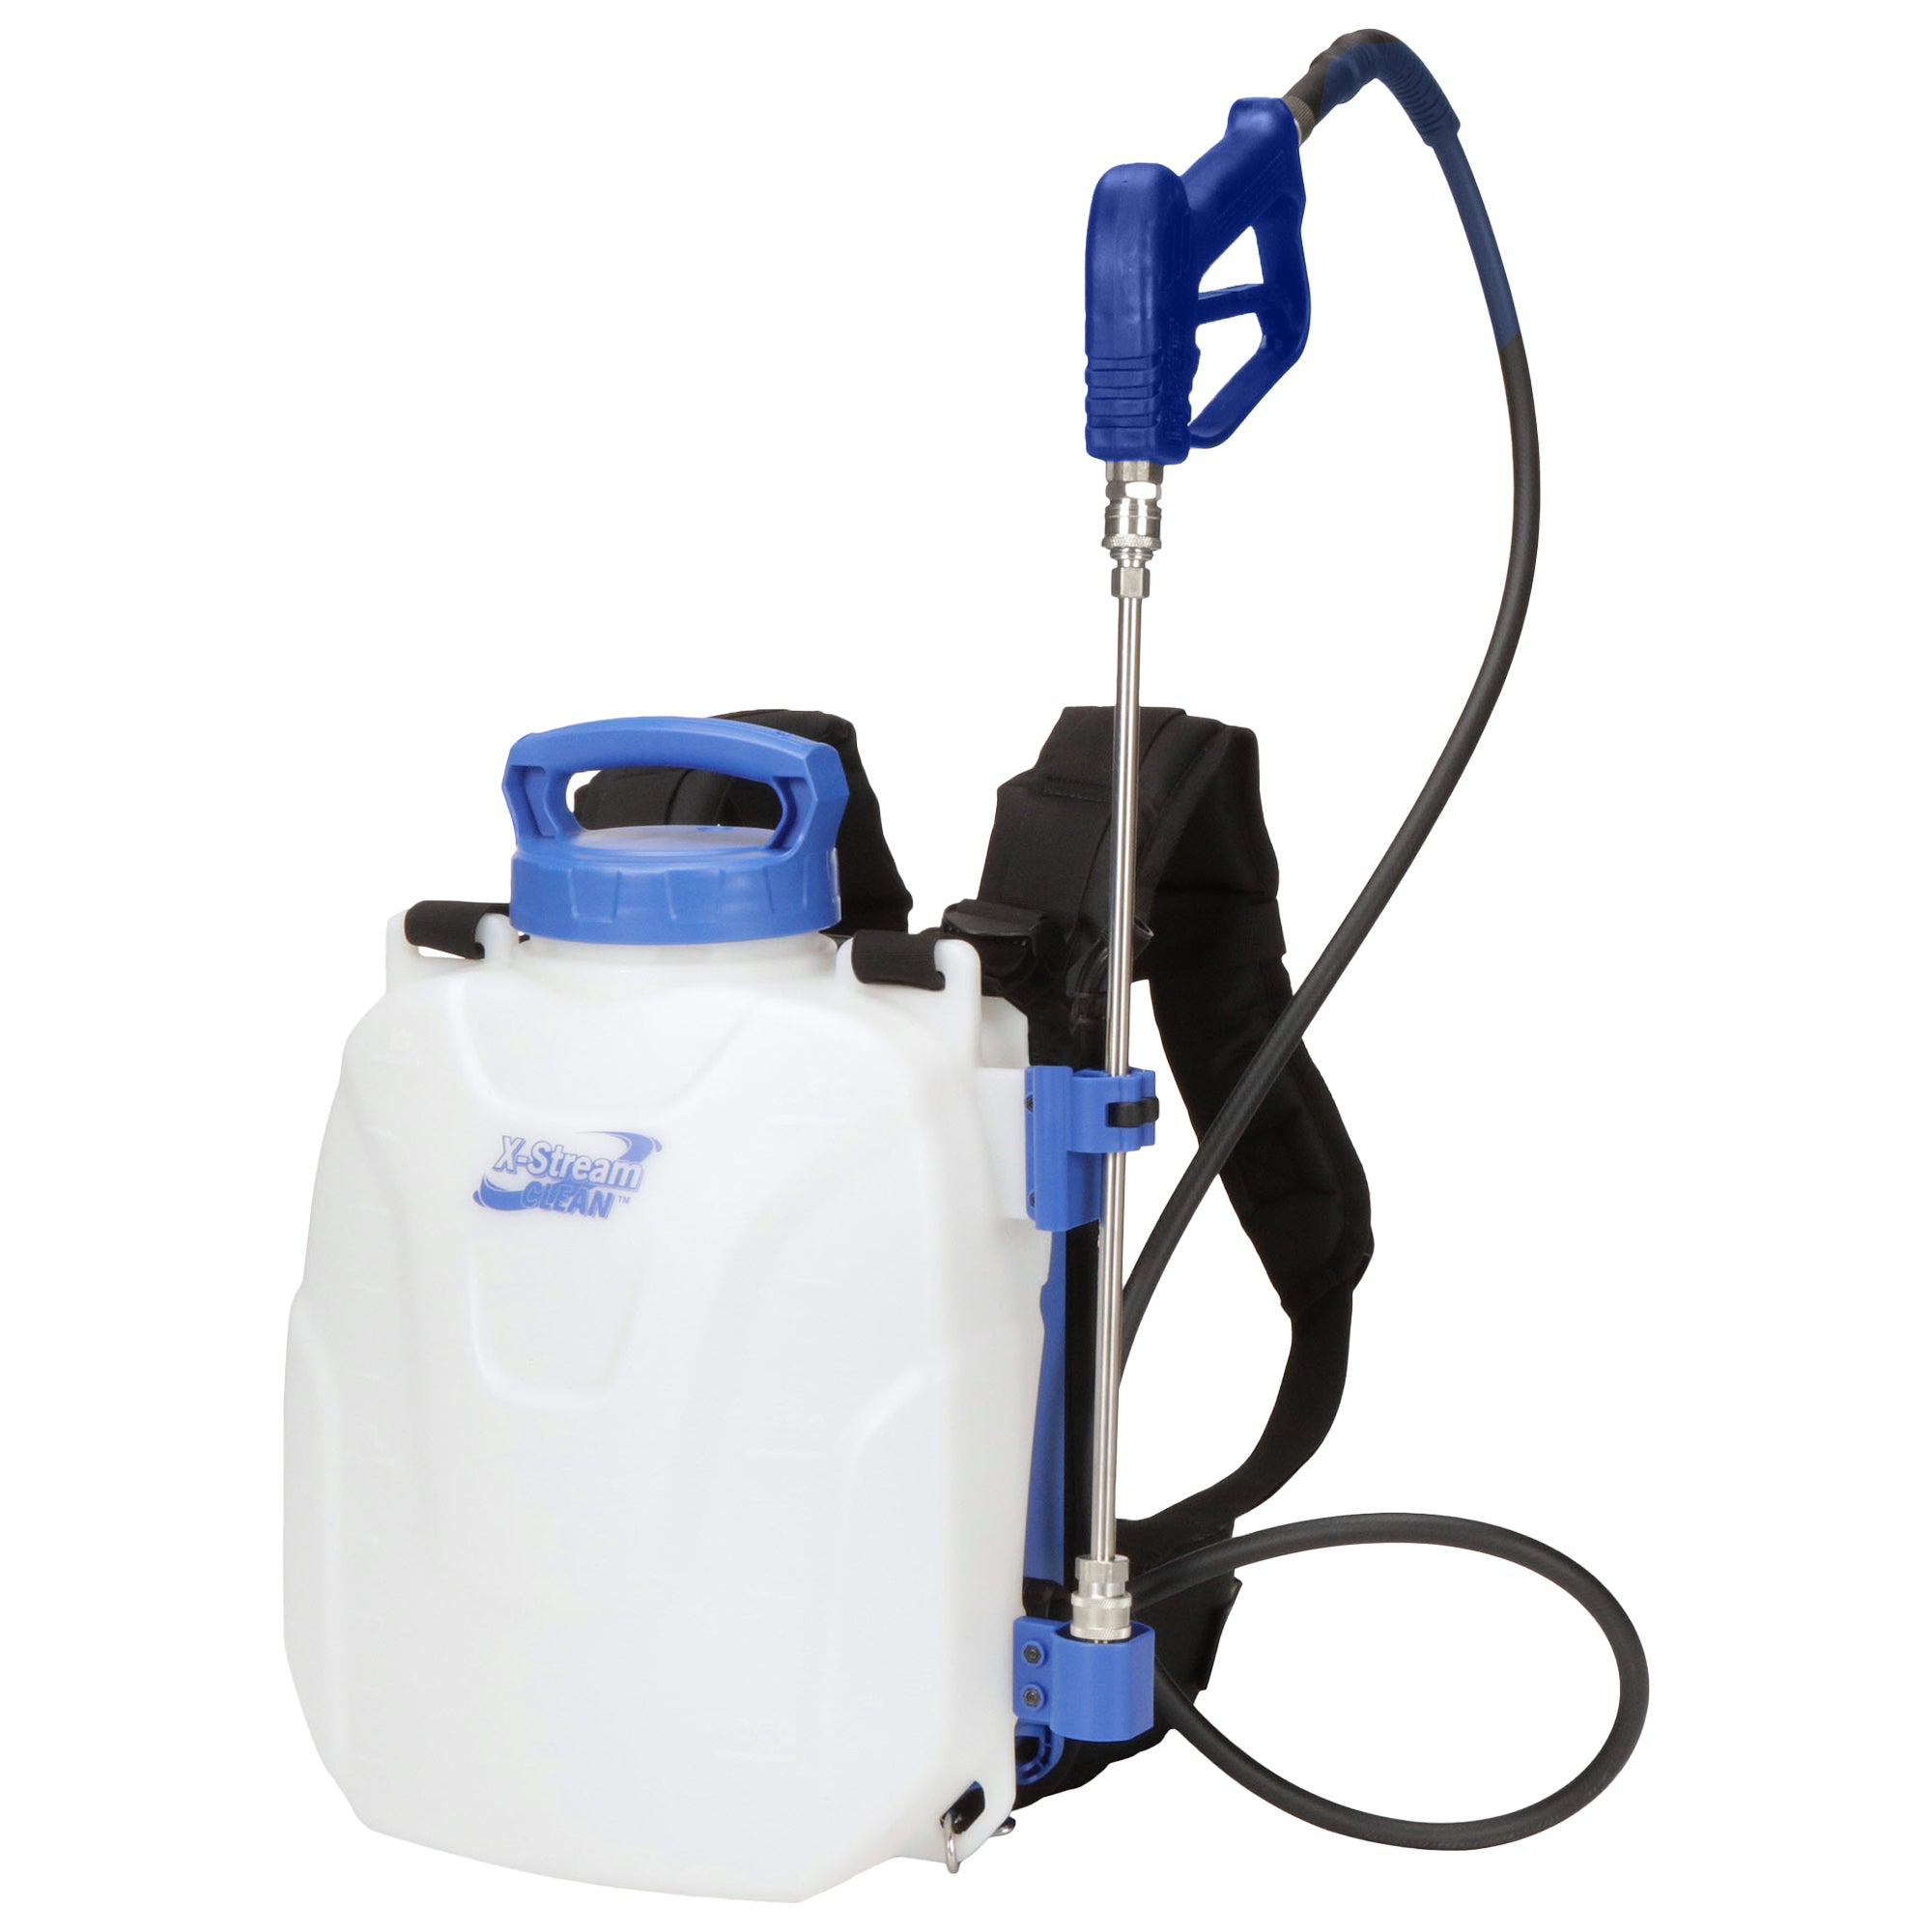 X-Stream Clean 2.5-Gallon Cleaning and  Sanitation Backpack Sprayer Front